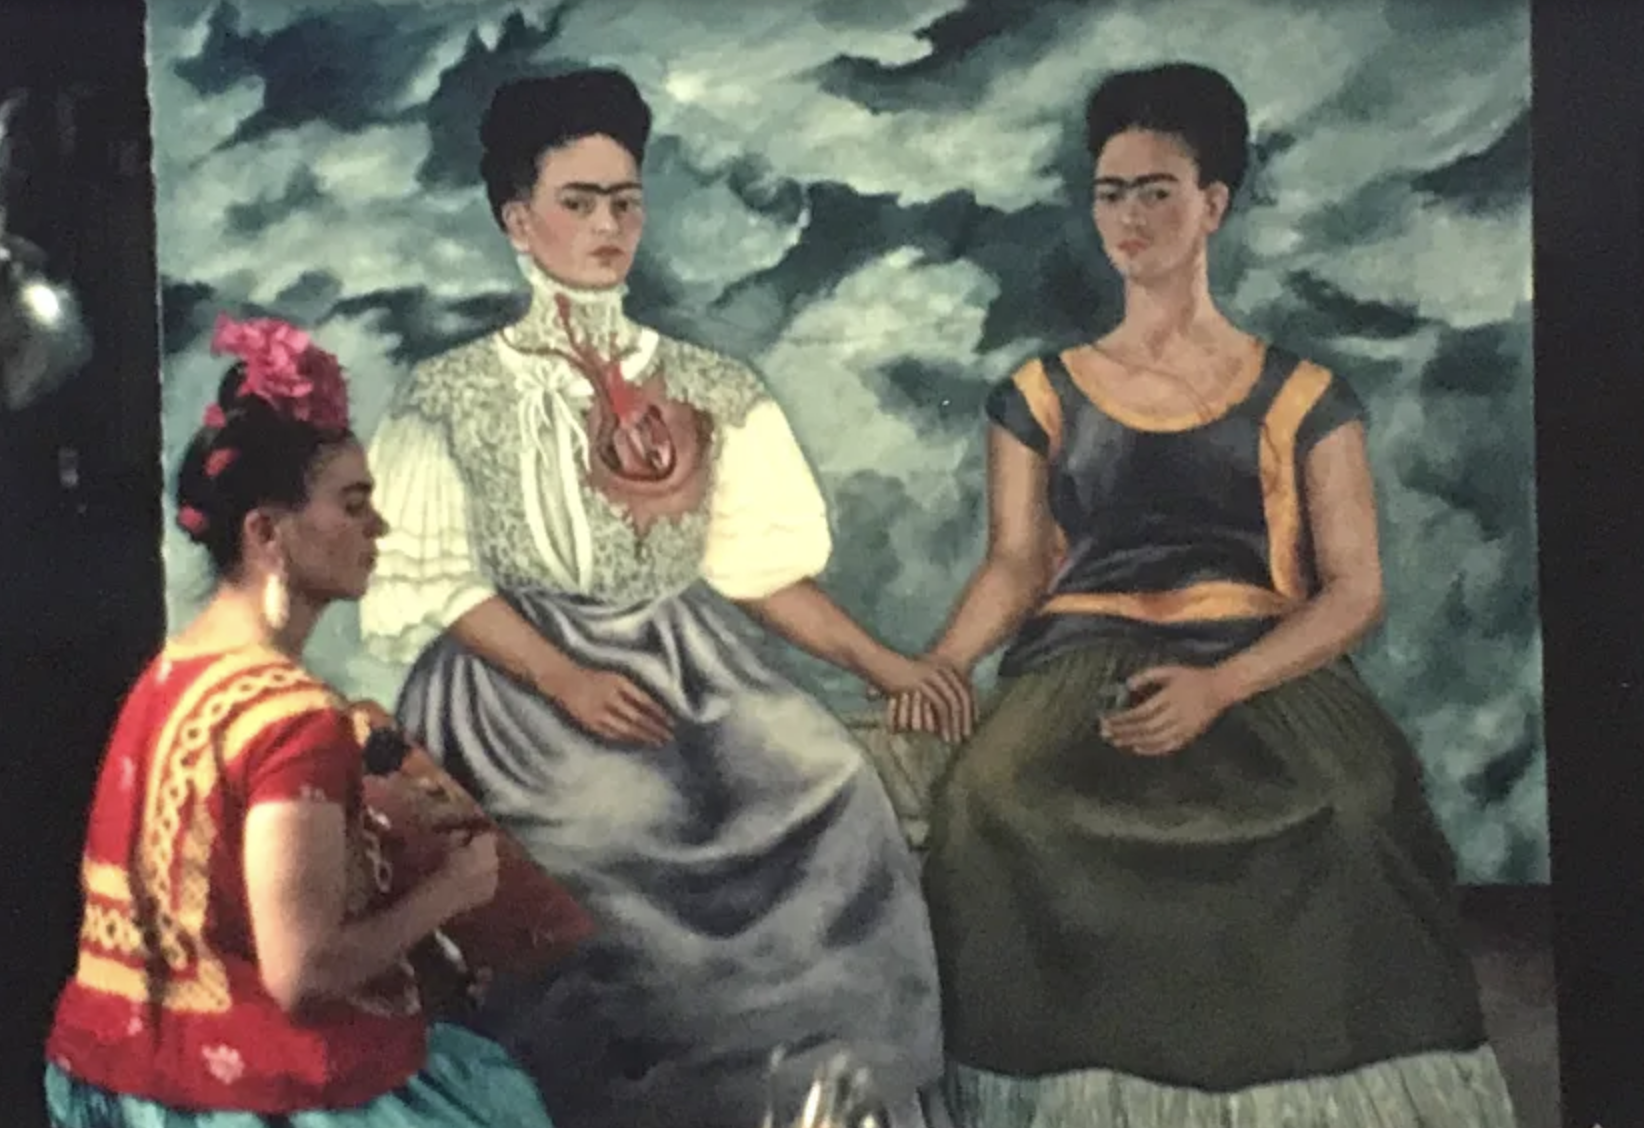 In Mexico City, an Immersive Frida Kahlo Extravaganza Is Running